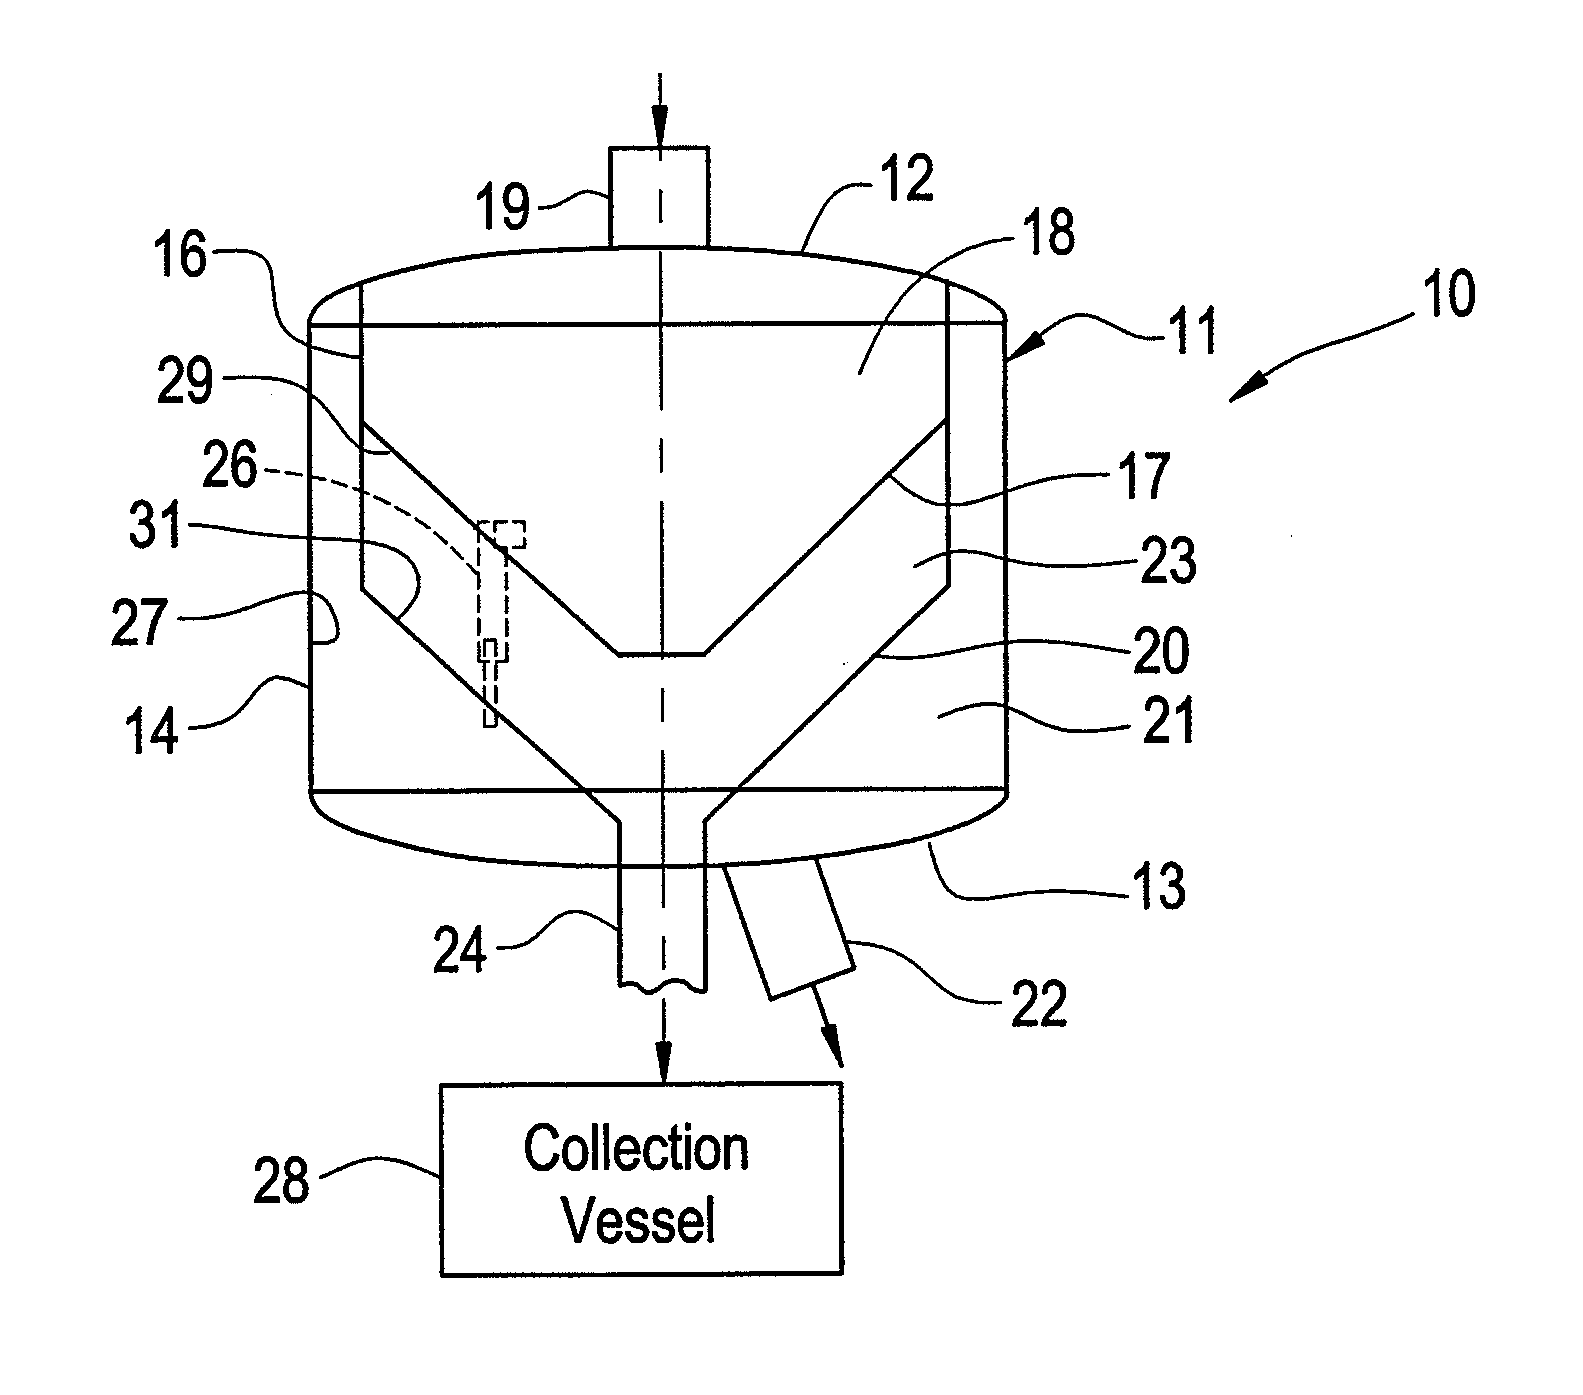 Apparatus and Method for Separating Solids from Gas Streams